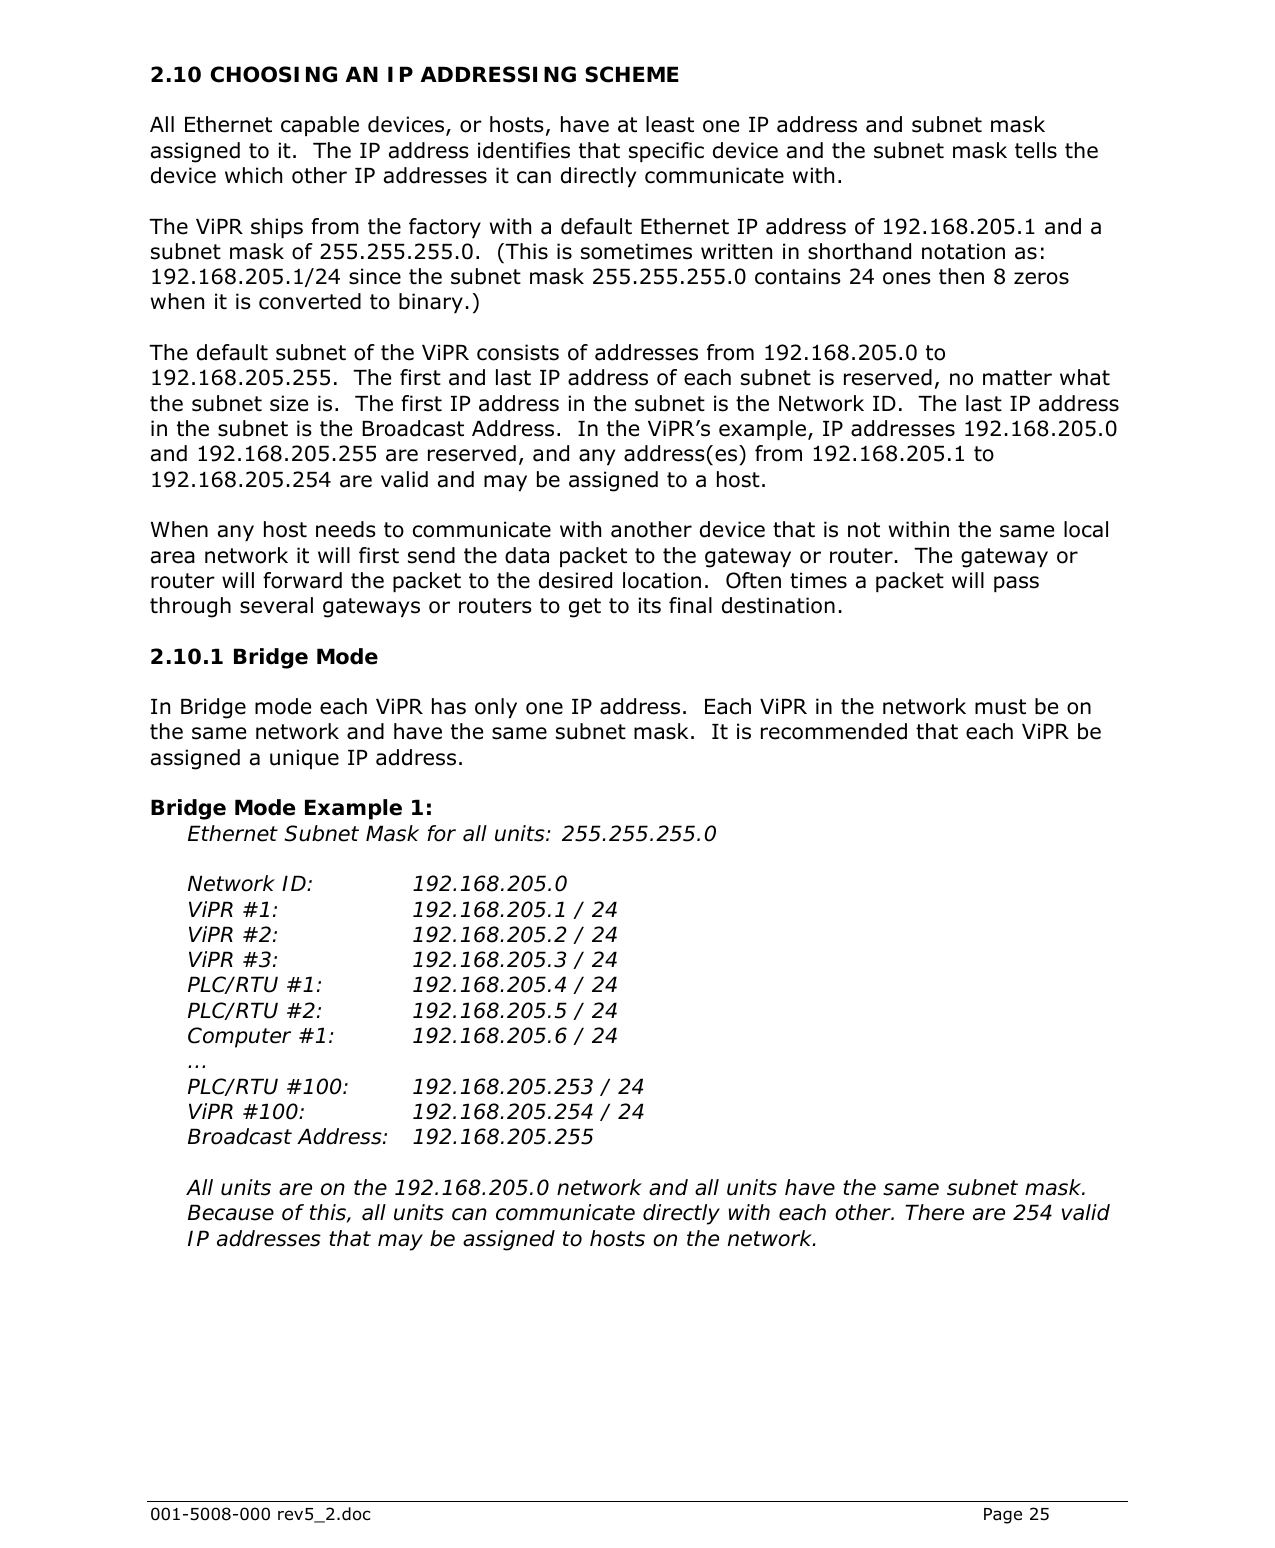  001-5008-000 rev5_2.doc    Page 25 2.10 CHOOSING AN IP ADDRESSING SCHEME All Ethernet capable devices, or hosts, have at least one IP address and subnet mask assigned to it.  The IP address identifies that specific device and the subnet mask tells the device which other IP addresses it can directly communicate with.   The ViPR ships from the factory with a default Ethernet IP address of 192.168.205.1 and a subnet mask of 255.255.255.0.  (This is sometimes written in shorthand notation as: 192.168.205.1/24 since the subnet mask 255.255.255.0 contains 24 ones then 8 zeros when it is converted to binary.)  The default subnet of the ViPR consists of addresses from 192.168.205.0 to 192.168.205.255.  The first and last IP address of each subnet is reserved, no matter what the subnet size is.  The first IP address in the subnet is the Network ID.  The last IP address in the subnet is the Broadcast Address.  In the ViPR’s example, IP addresses 192.168.205.0 and 192.168.205.255 are reserved, and any address(es) from 192.168.205.1 to 192.168.205.254 are valid and may be assigned to a host.  When any host needs to communicate with another device that is not within the same local area network it will first send the data packet to the gateway or router.  The gateway or router will forward the packet to the desired location.  Often times a packet will pass through several gateways or routers to get to its final destination. 2.10.1  Bridge Mode  In Bridge mode each ViPR has only one IP address.  Each ViPR in the network must be on the same network and have the same subnet mask.  It is recommended that each ViPR be assigned a unique IP address.  Bridge Mode Example 1: Ethernet Subnet Mask for all units: 255.255.255.0  Network ID:    192.168.205.0 ViPR #1:     192.168.205.1 / 24 ViPR #2:     192.168.205.2 / 24 ViPR #3:     192.168.205.3 / 24 PLC/RTU #1:      192.168.205.4 / 24 PLC/RTU #2:      192.168.205.5 / 24 Computer #1:    192.168.205.6 / 24 … PLC/RTU #100:    192.168.205.253 / 24 ViPR #100:       192.168.205.254 / 24  Broadcast Address:   192.168.205.255  All units are on the 192.168.205.0 network and all units have the same subnet mask.  Because of this, all units can communicate directly with each other. There are 254 valid IP addresses that may be assigned to hosts on the network.